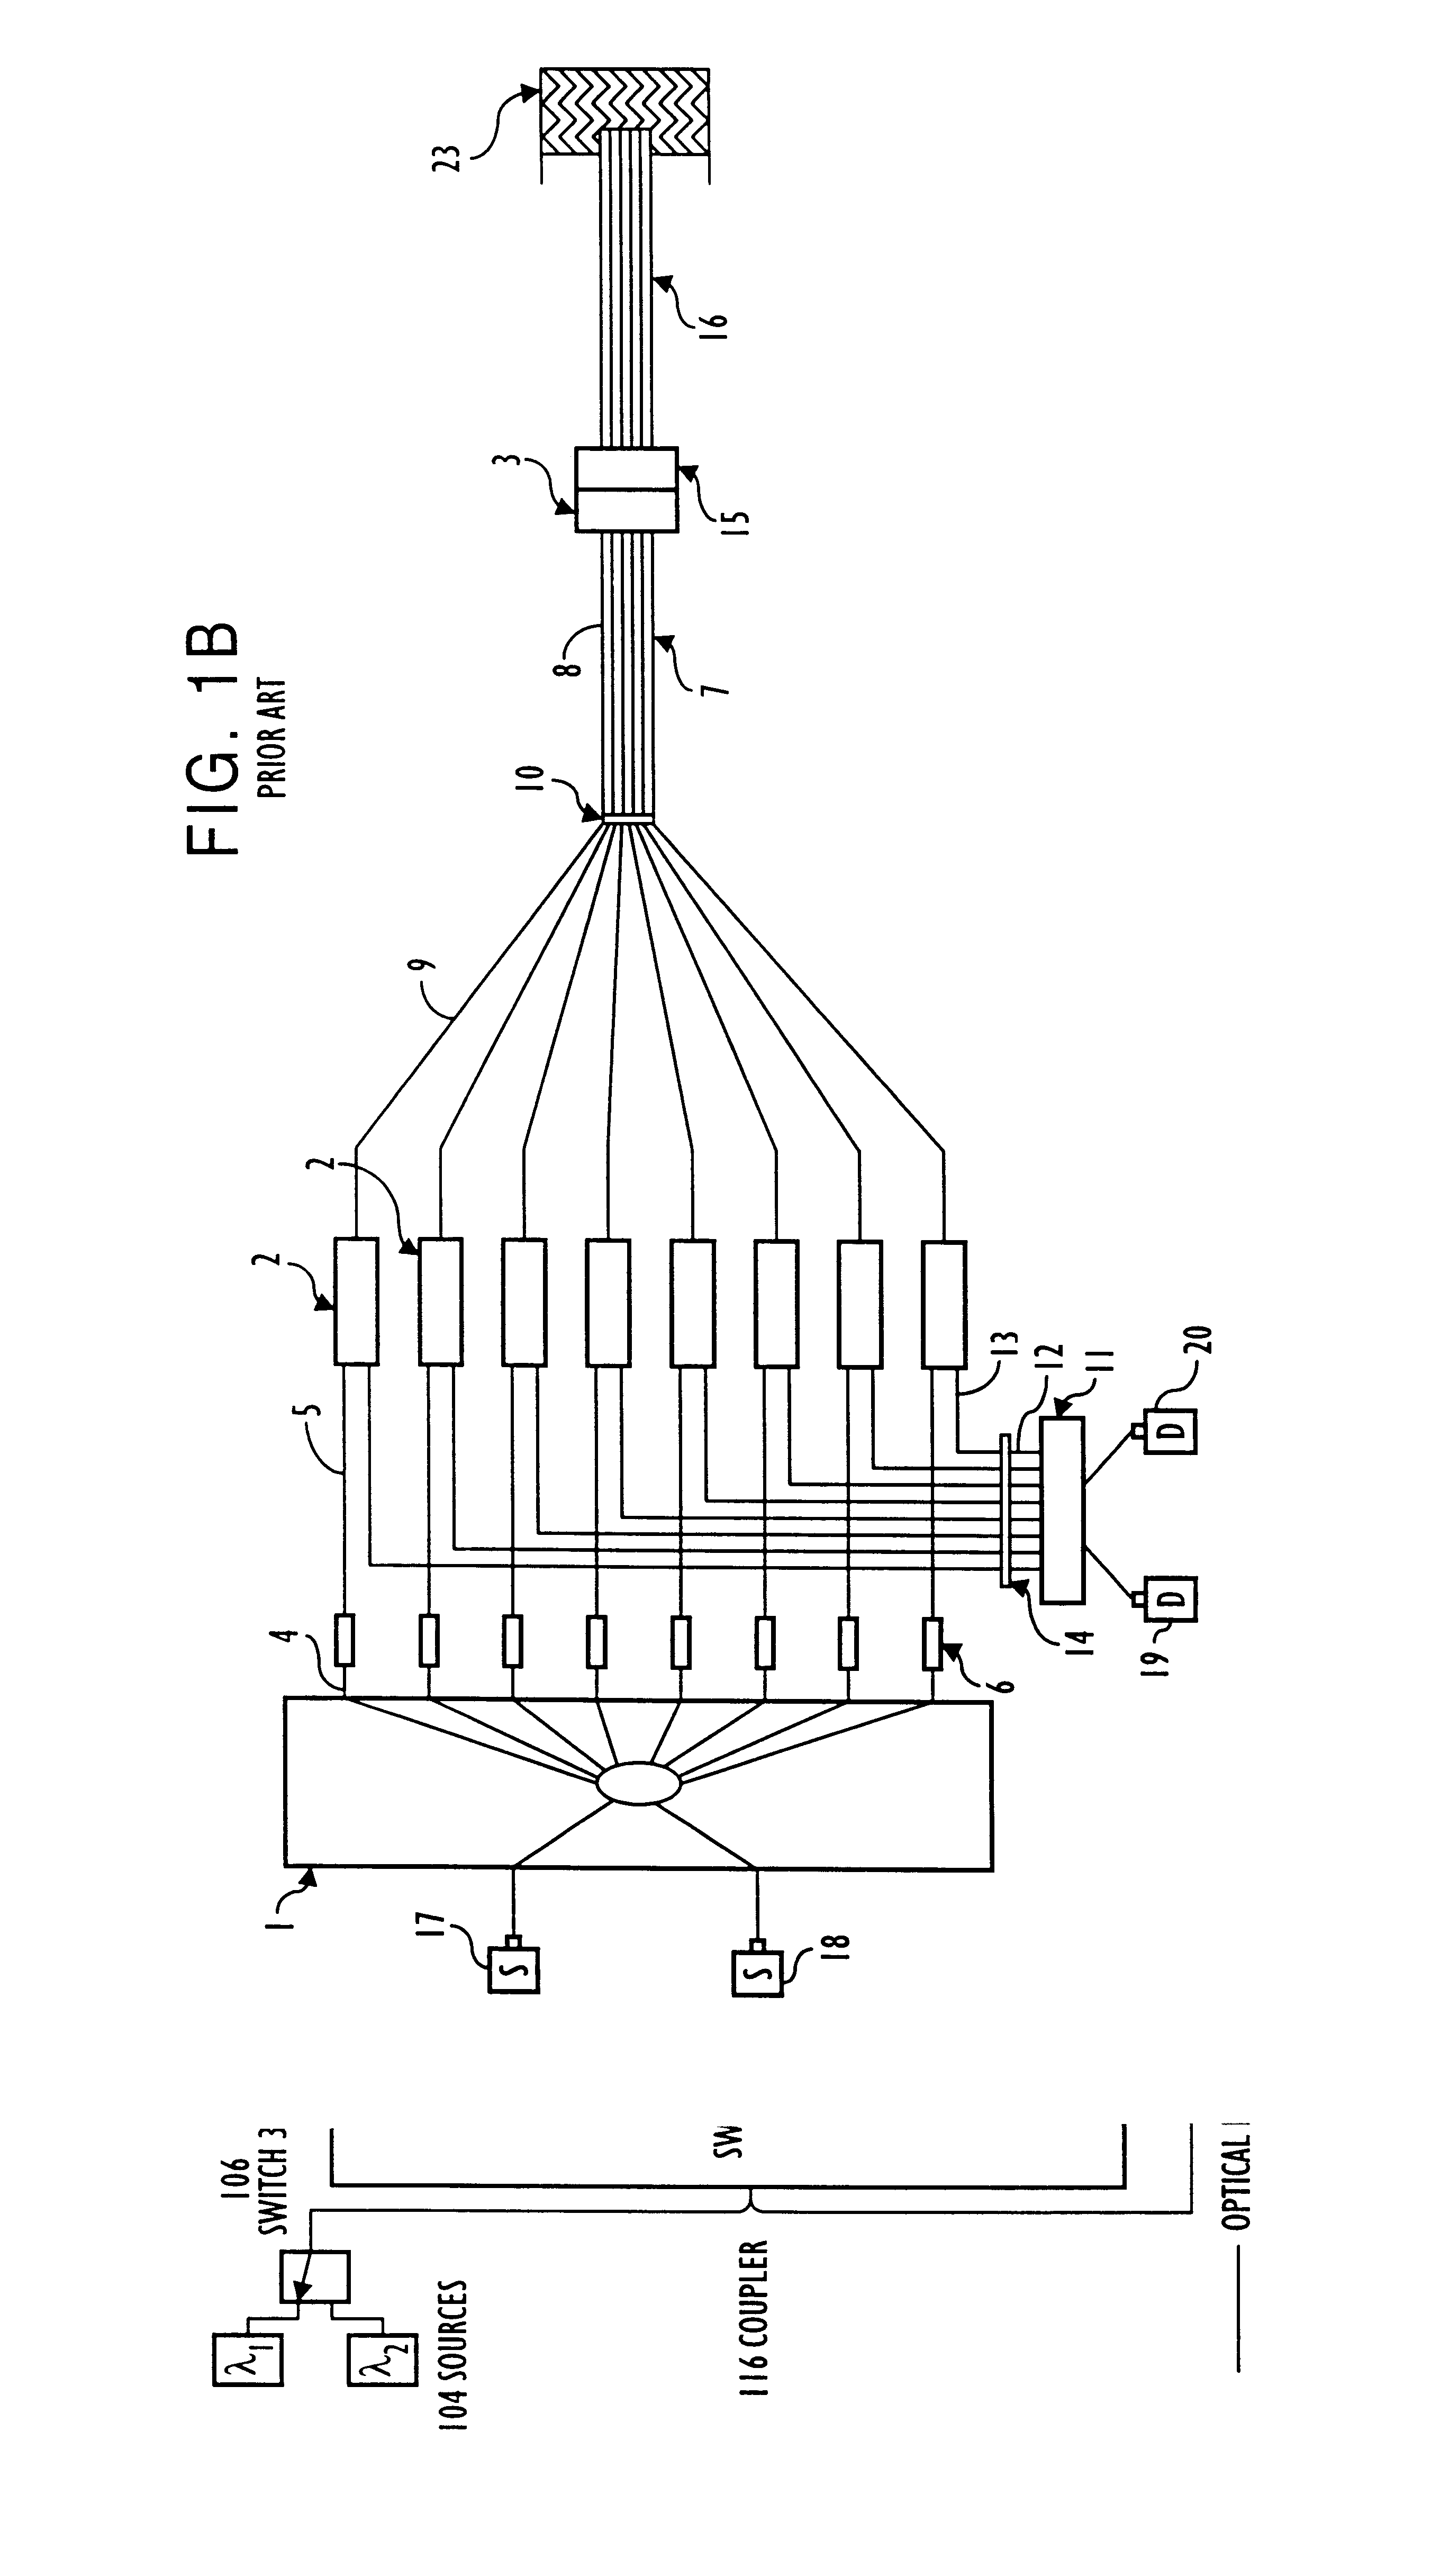 Apparatus and method for testing optical fiber system components